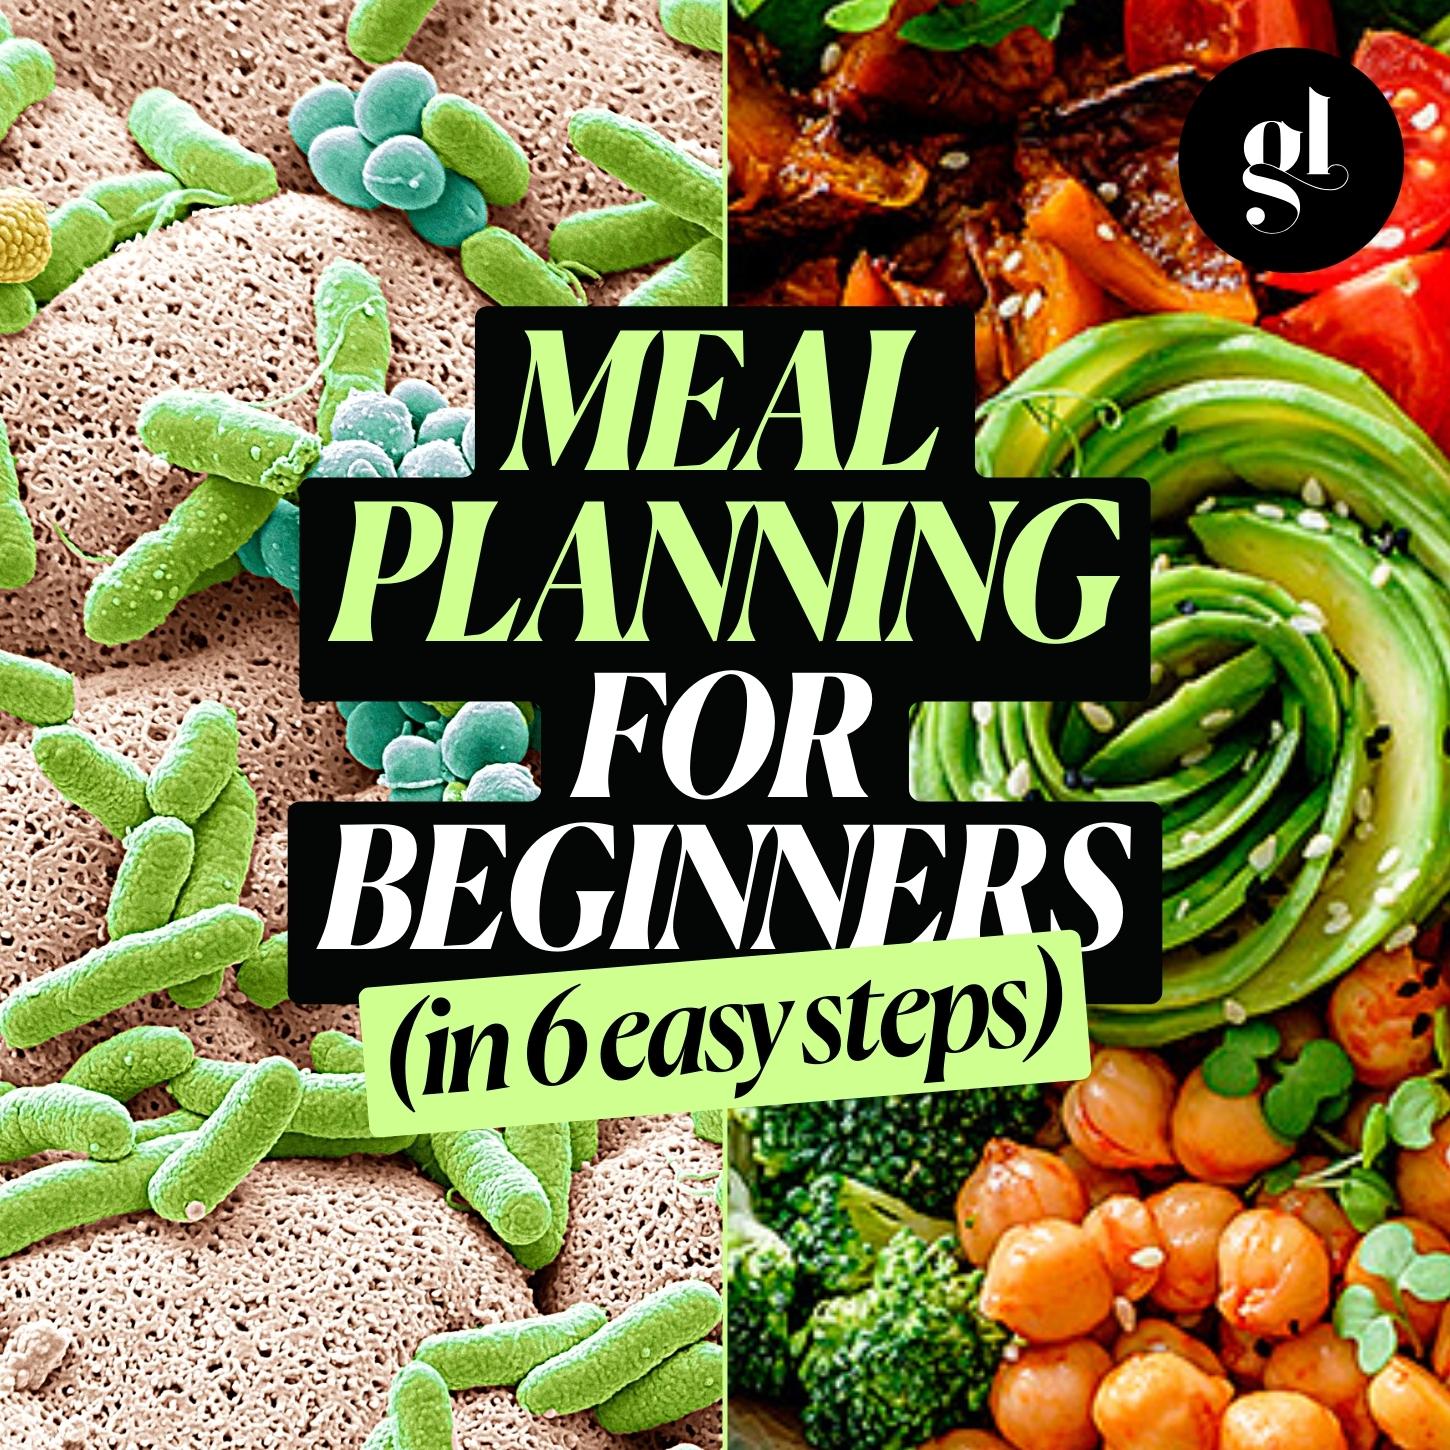 Meal Planning For Beginners (in 6 easy steps)